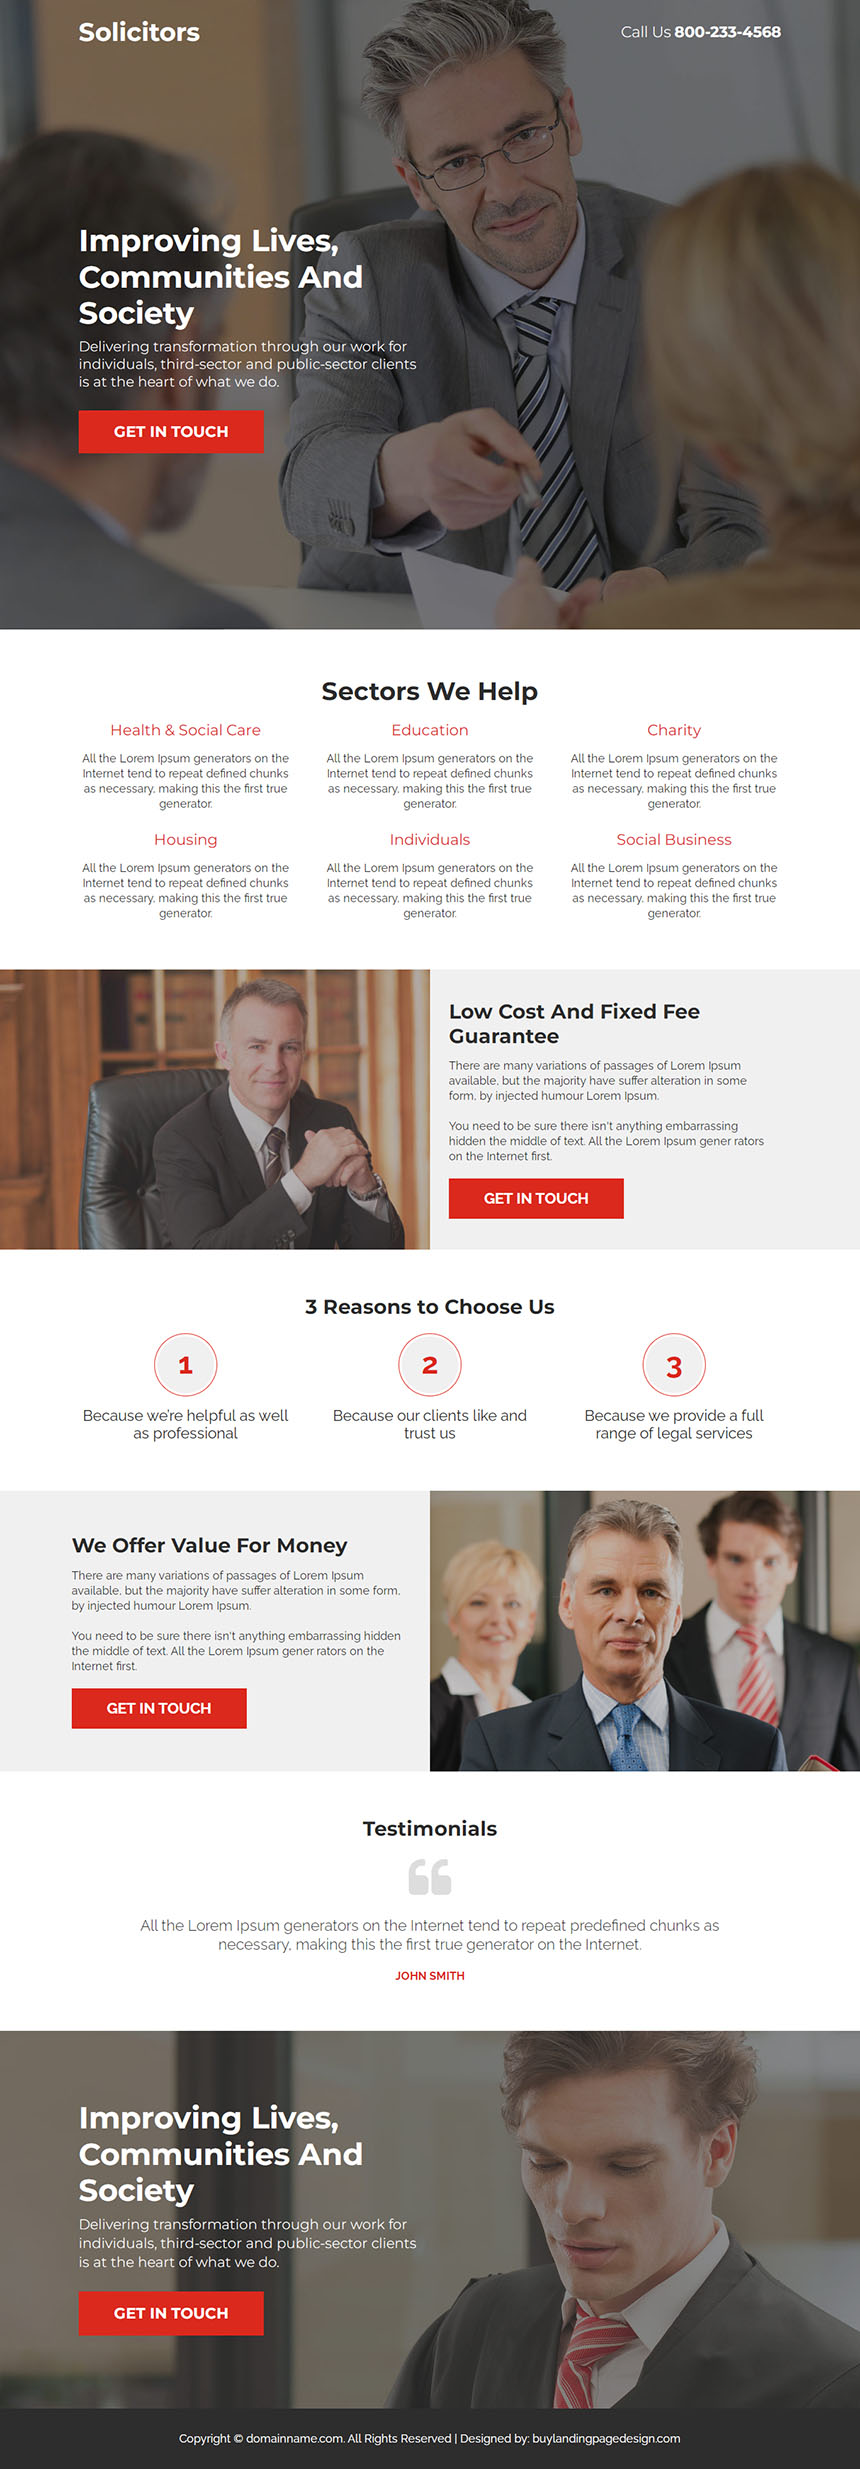 solicitor service lead capture responsive landing page